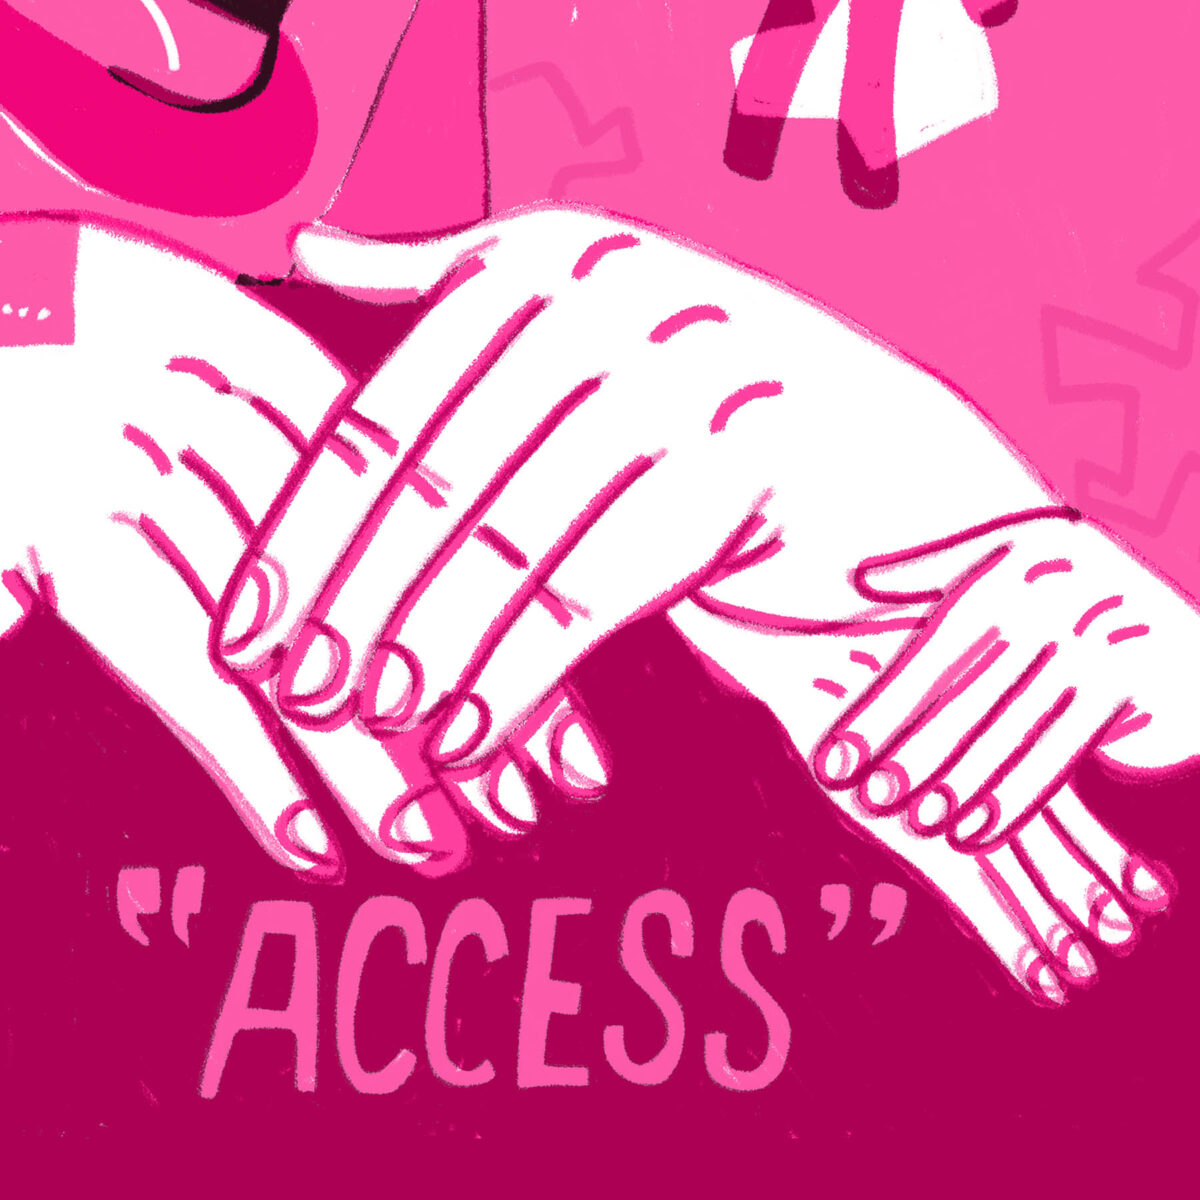 An illustration of hands signing access, drawn in shades of pink.